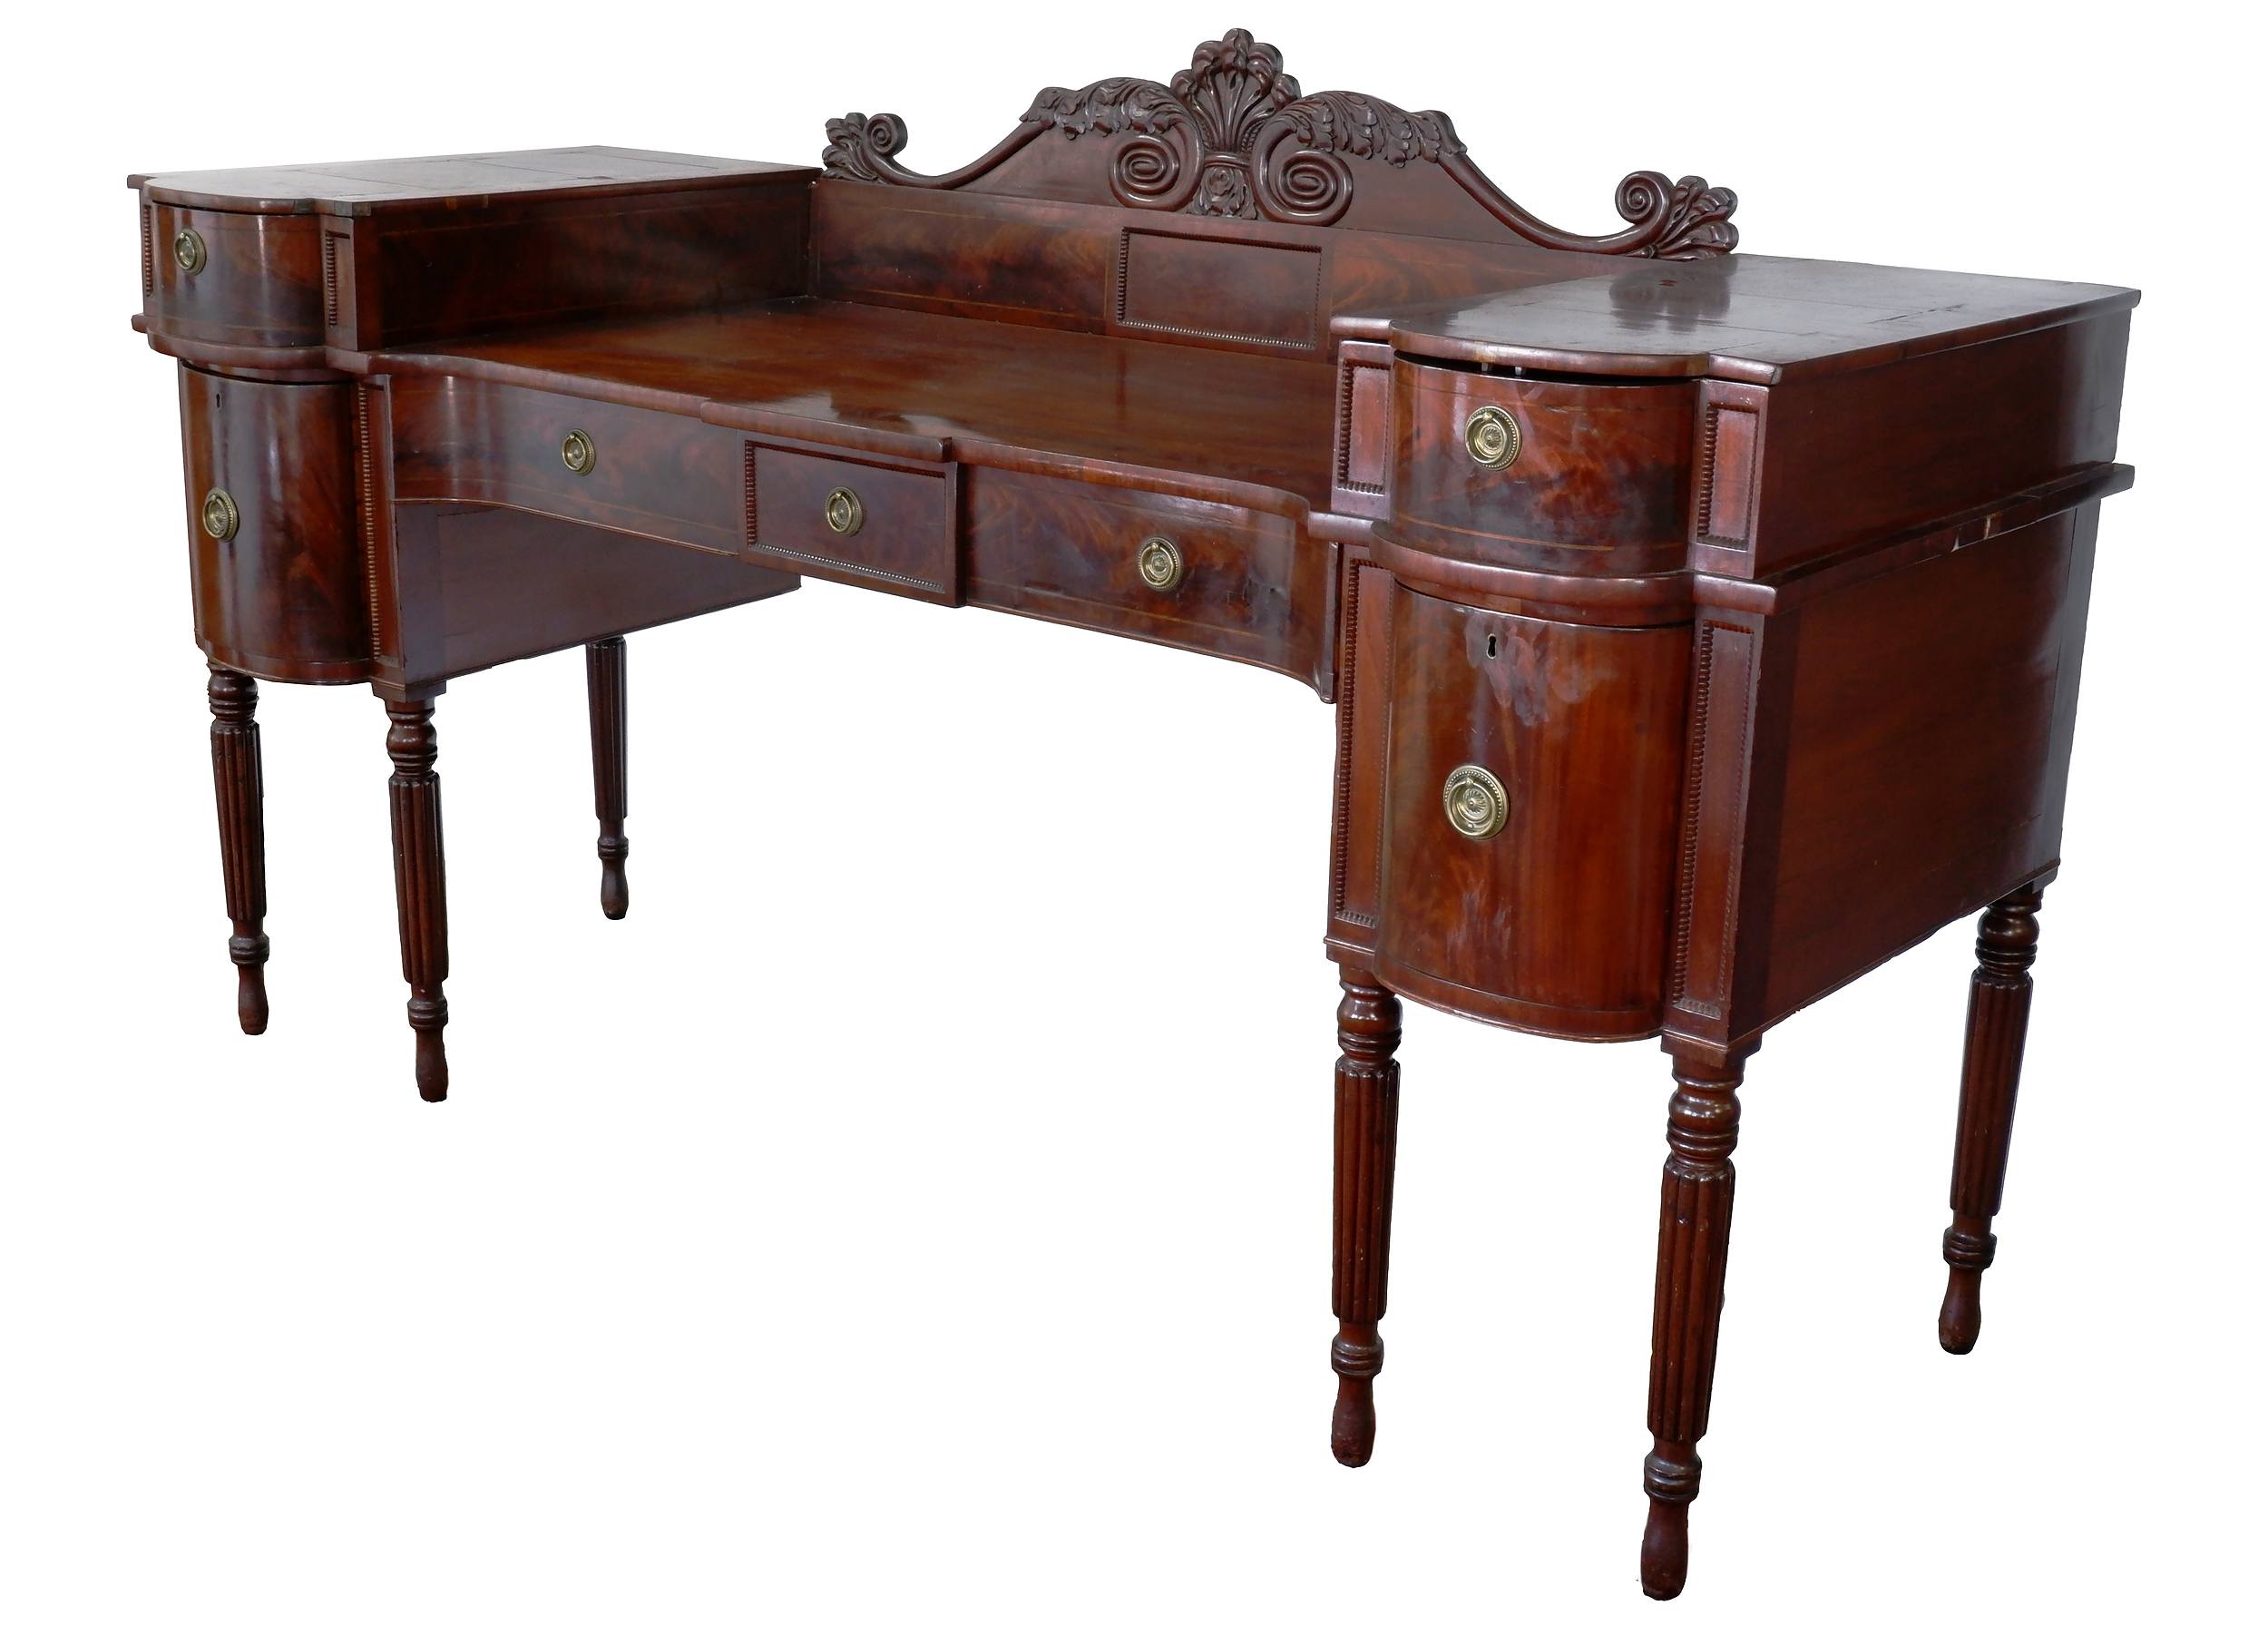 'Regency Serpentine Front Flame Mahogany Twin Sideboard with Six Fluted Legs and Prince of Wales Feather Paterae, Circa 1825'